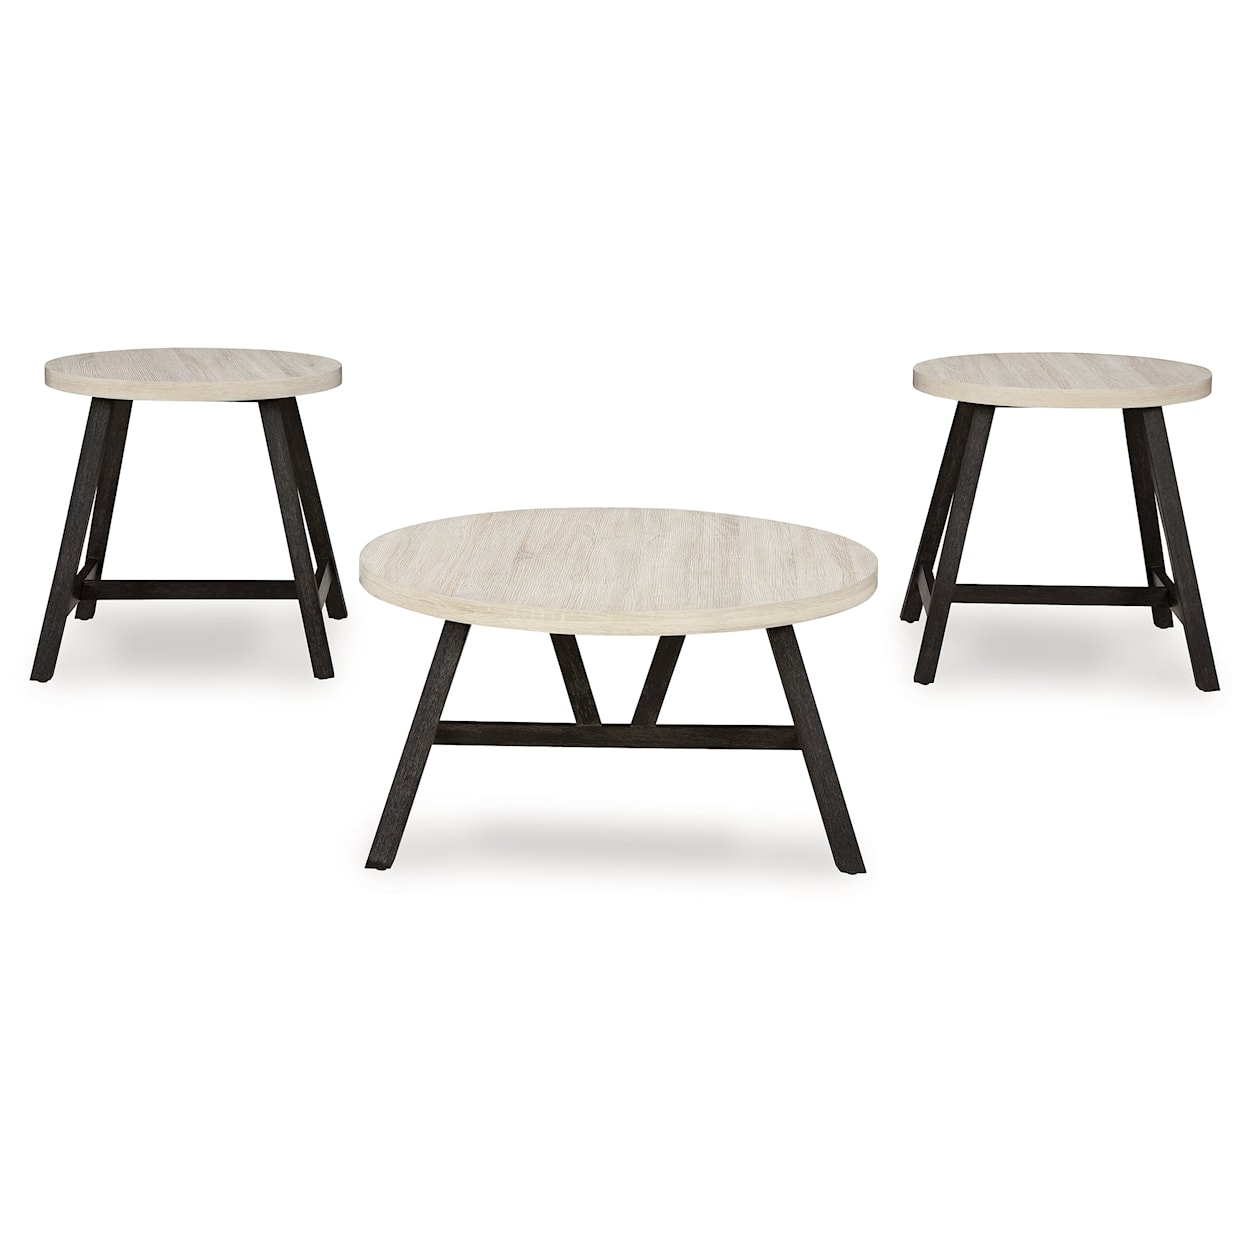 Signature Design by Ashley Fladona Occasional Table (Set of 3)